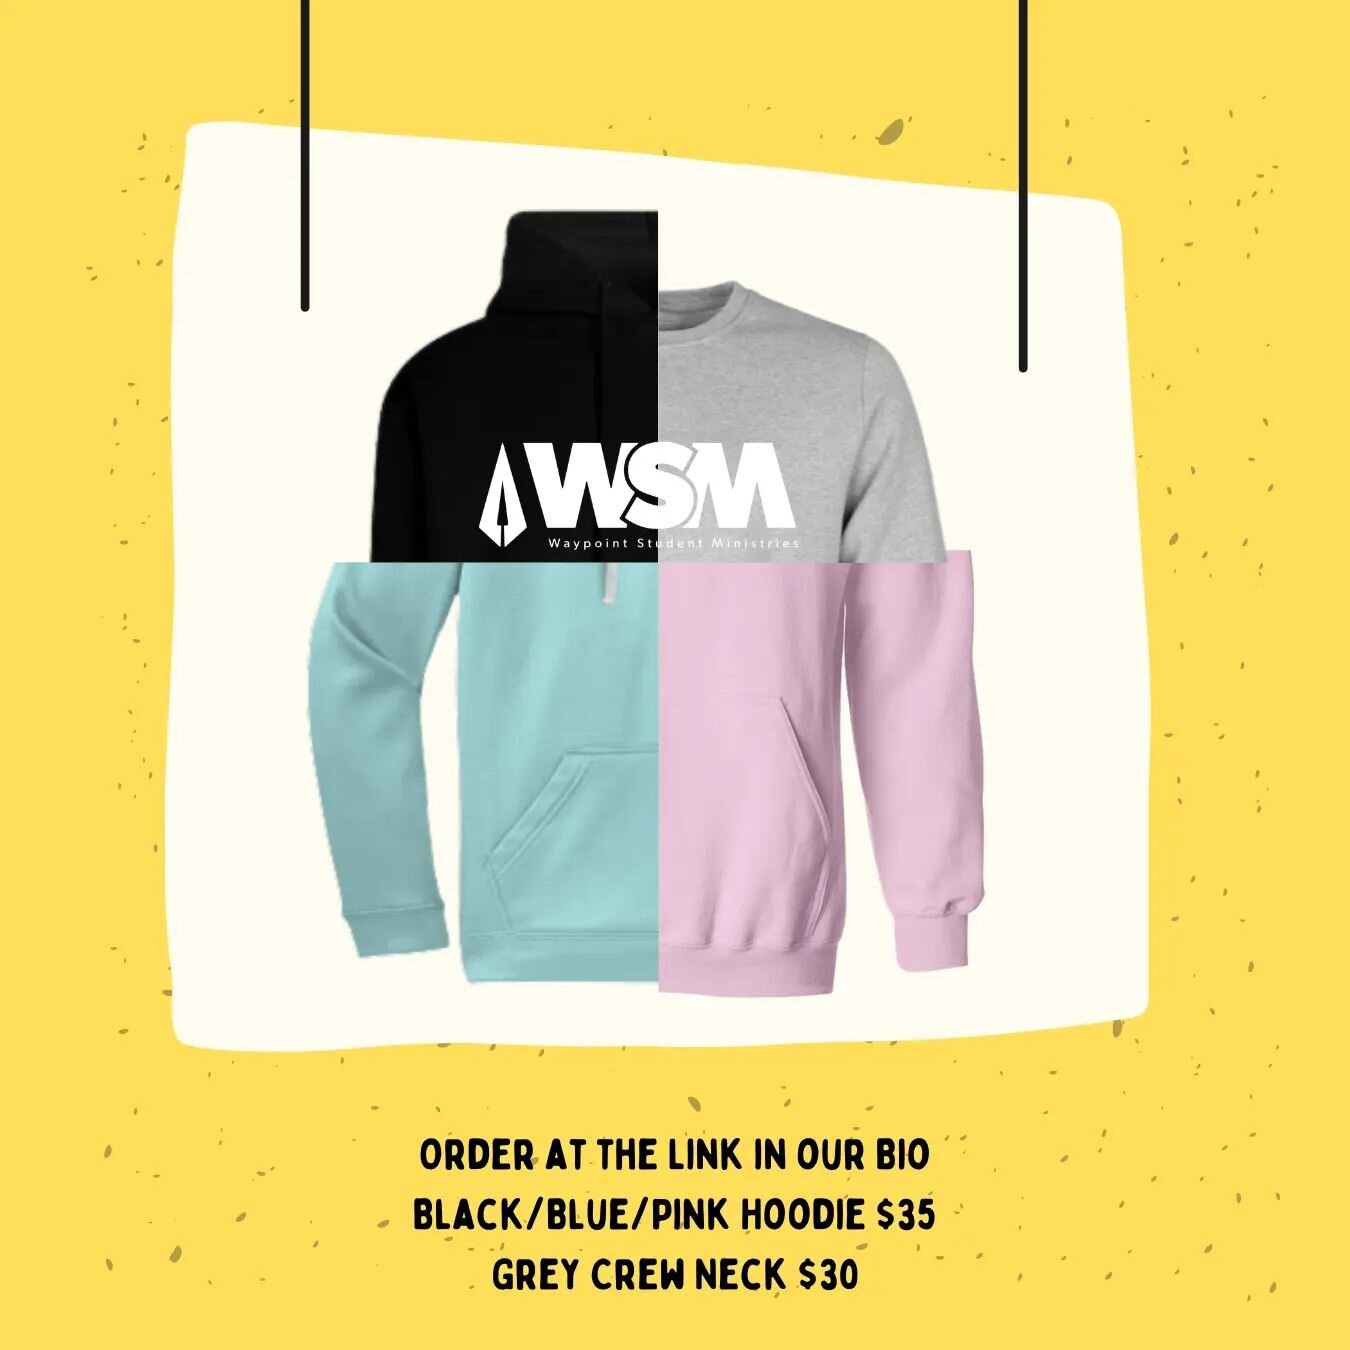 Hey! Want a Sweatshirt? Order today! Last day for orders is March 15th! Don't miss out! Link in bio!

https://waypointcommunitychurch.churchcenter.com/registrations/events/1665651